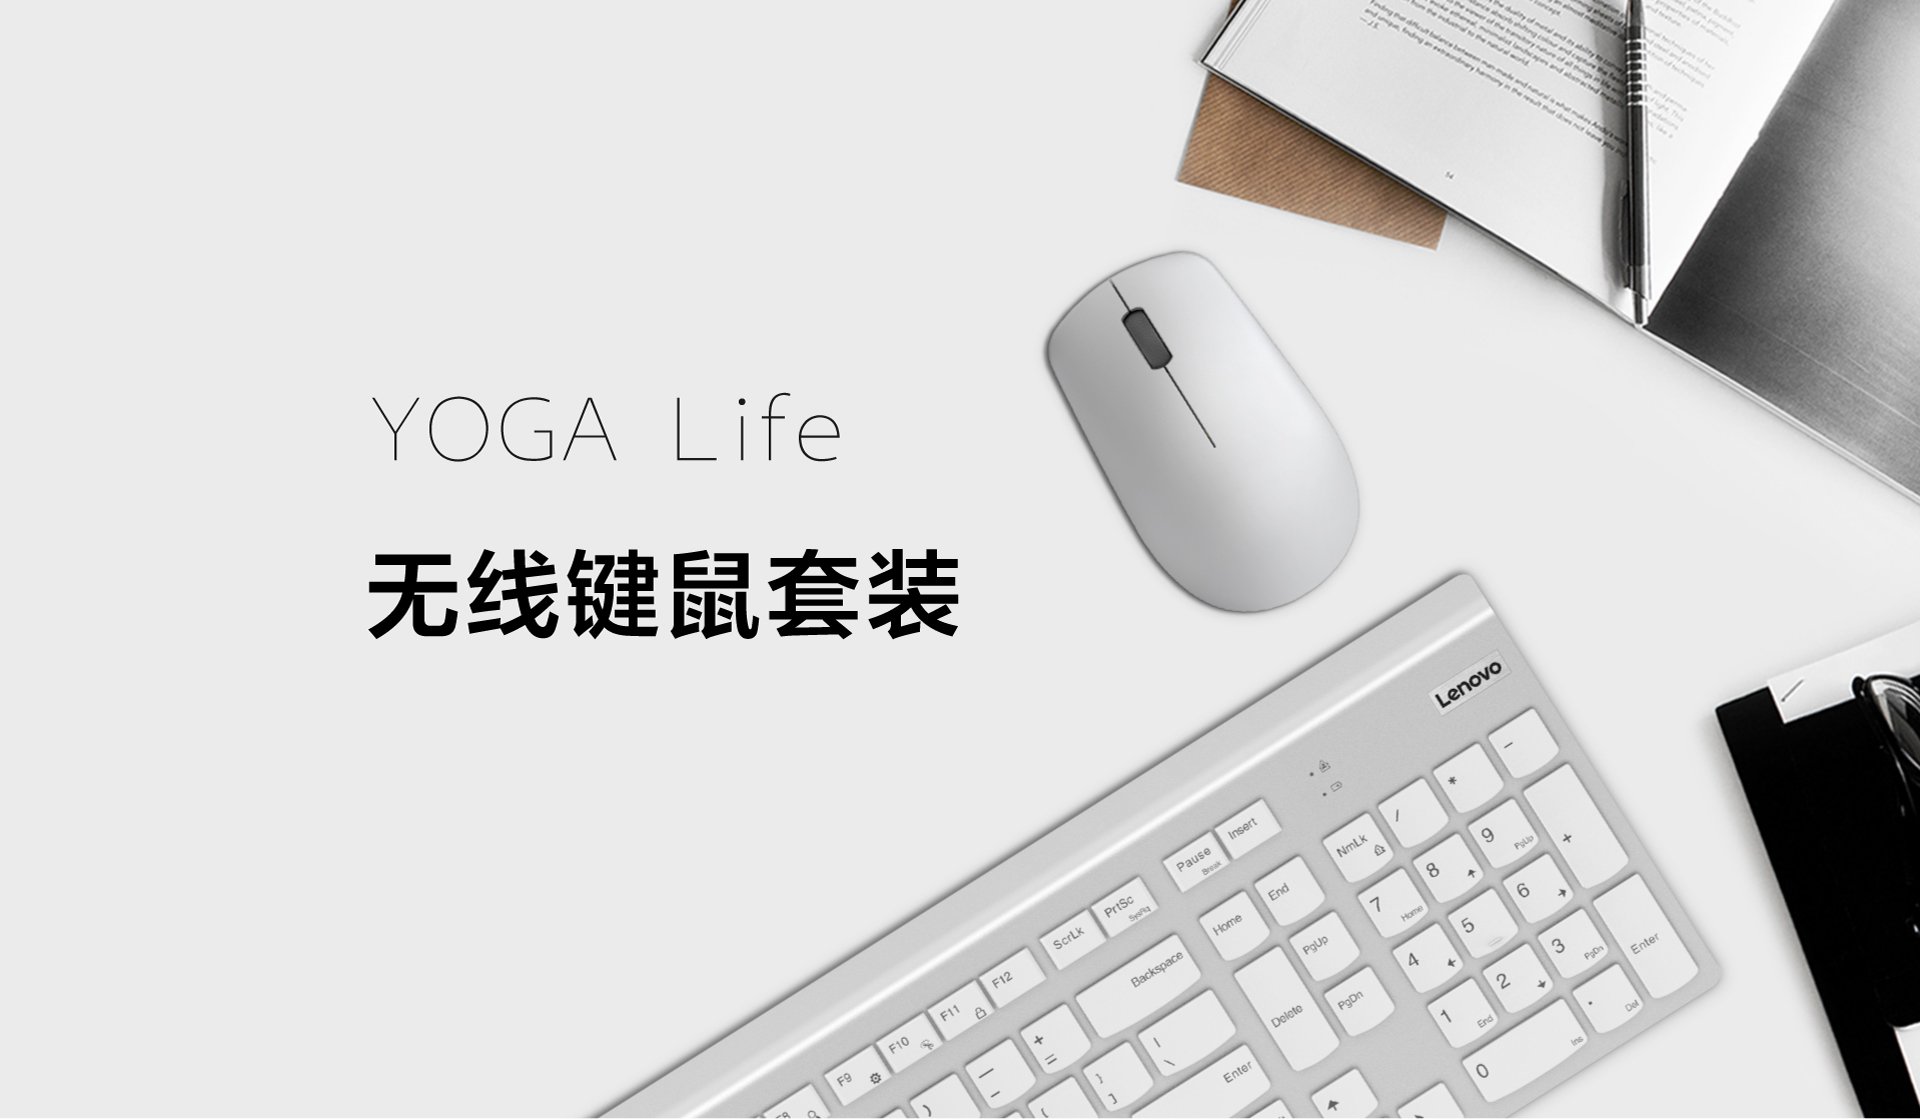 Lenovo YOGA Life Wireless Keyboard and Mouse Combo launched for 299 yuan ($45)